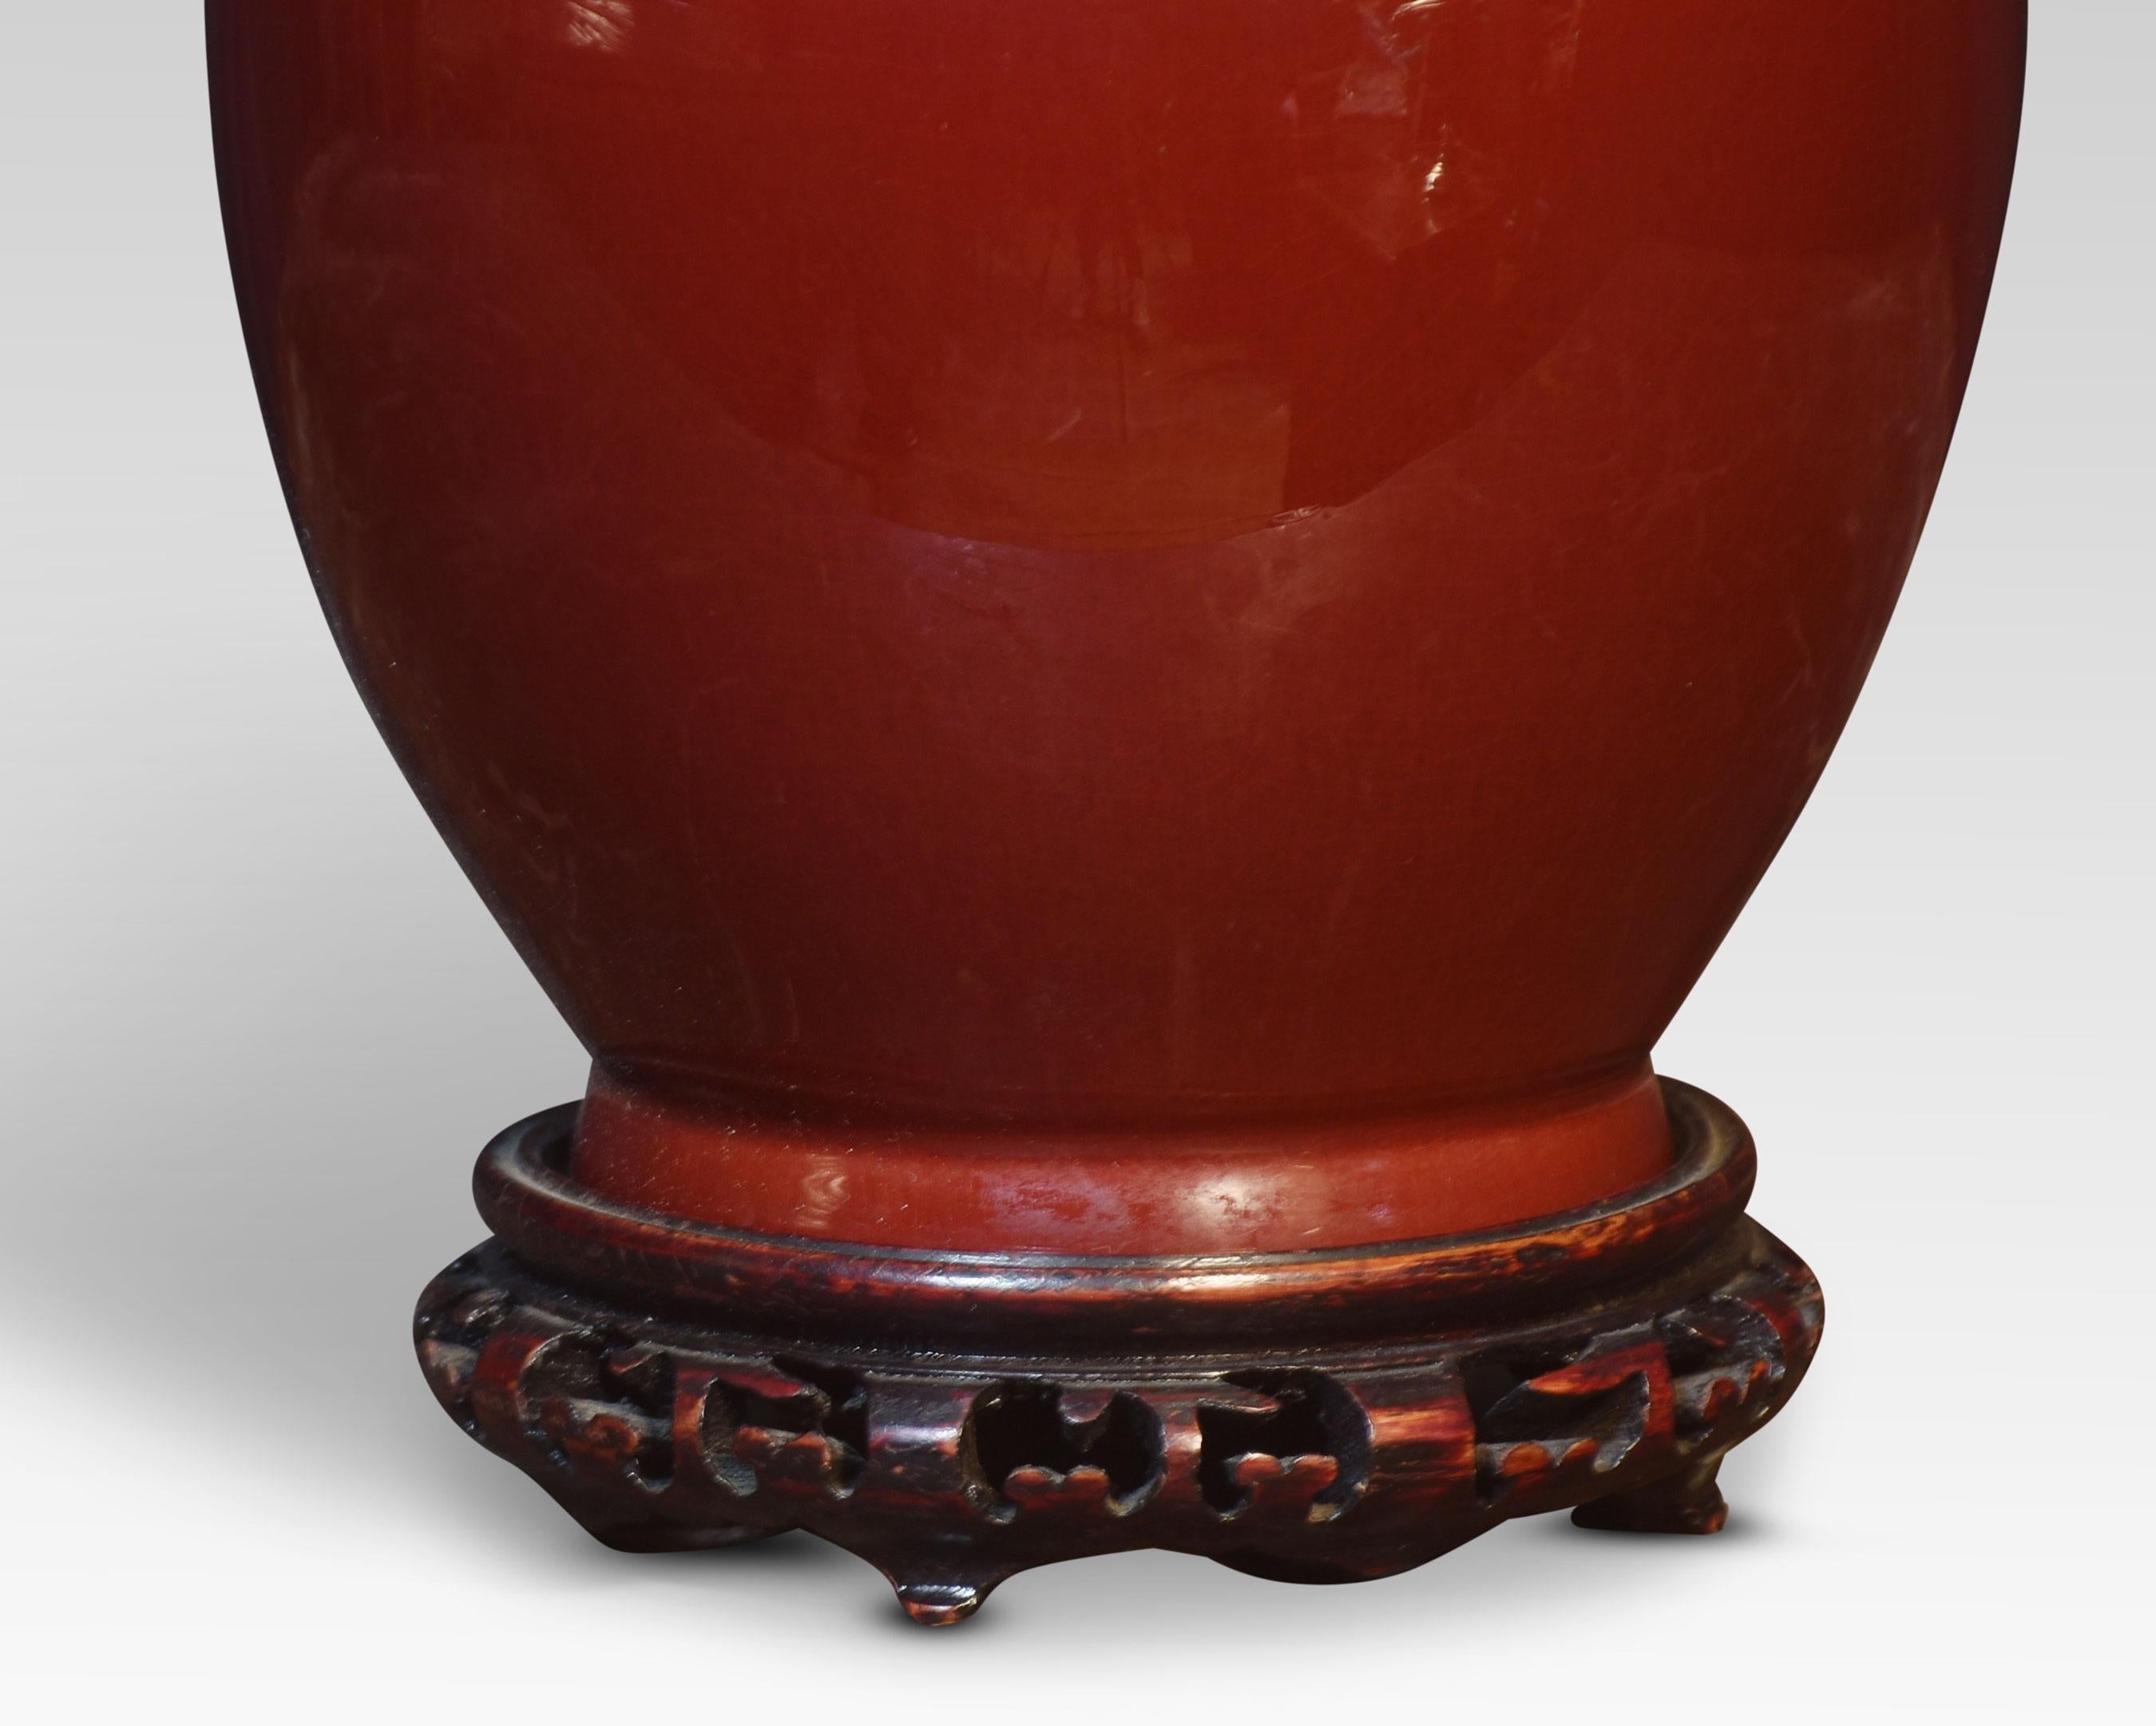 Chinese porcelain monochrome sang-de-boeuf baluster vase lamp, with carved and pierced wood base.
Dimensions
Height 22.5 Inches
Width 7 Inches
Depth 7 Inches